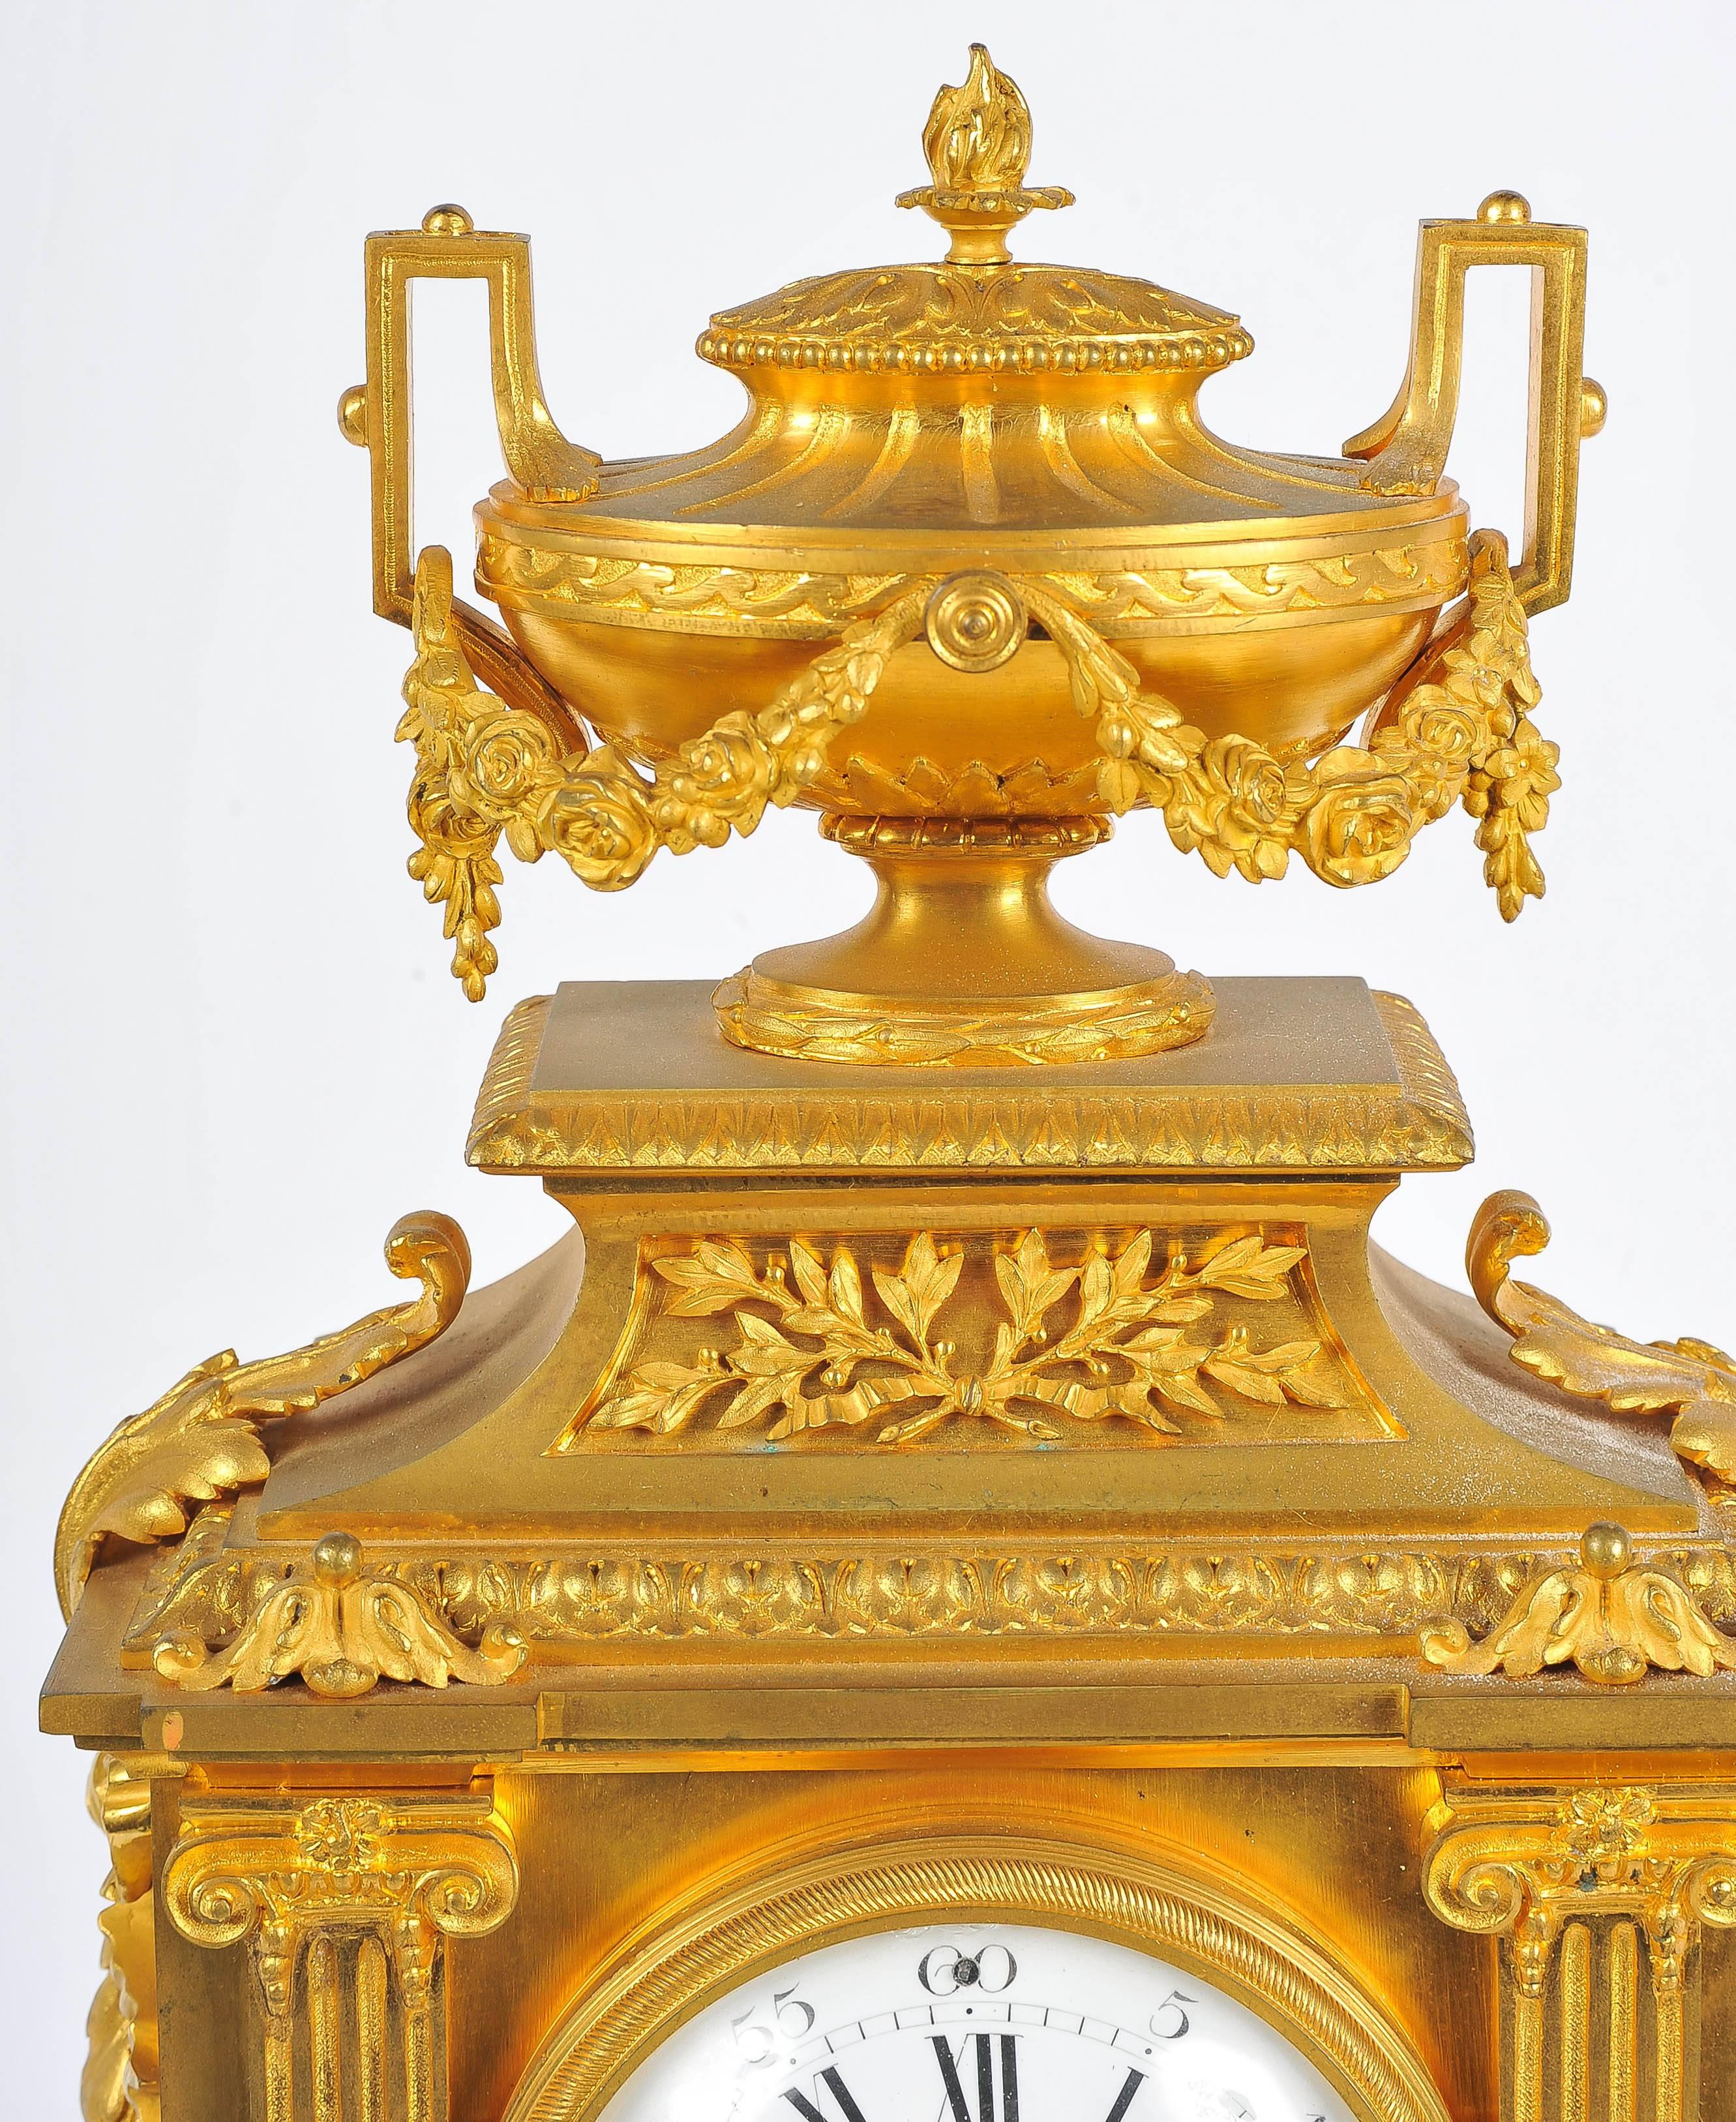 A good quality French Louis XVI style, gilded ormolu mantel clock, having an urn to the top with swags, pierced ormolu panels, Cornucopia and columns on either side of the clock face. The white enamel dial with an eight day striking movement.
    